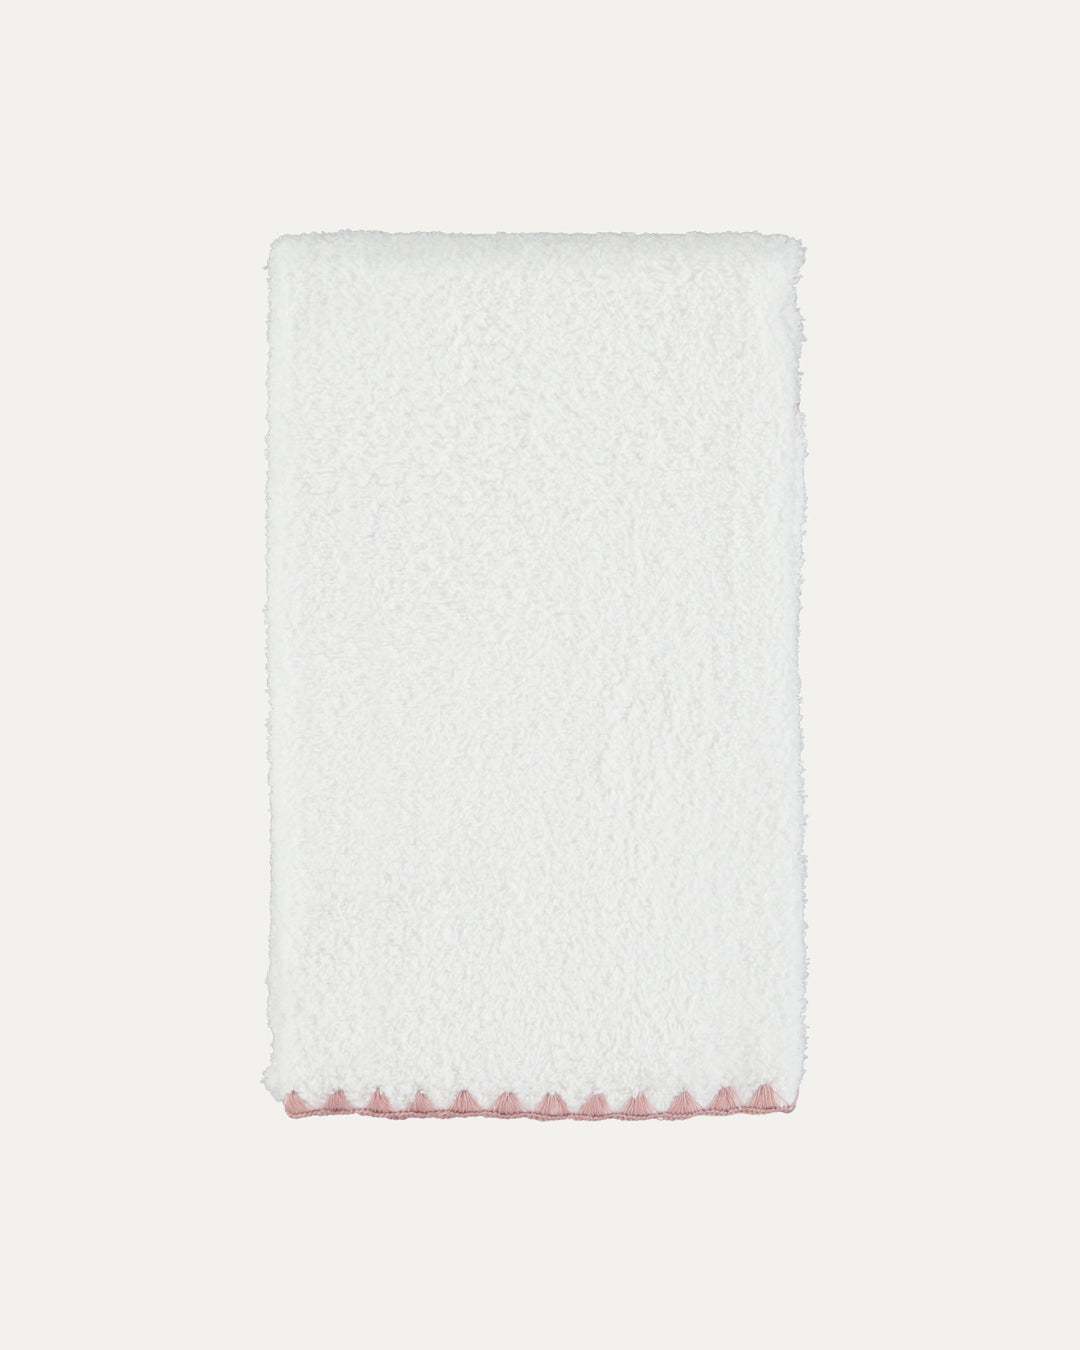 Concha Bath Towel, White with Pink